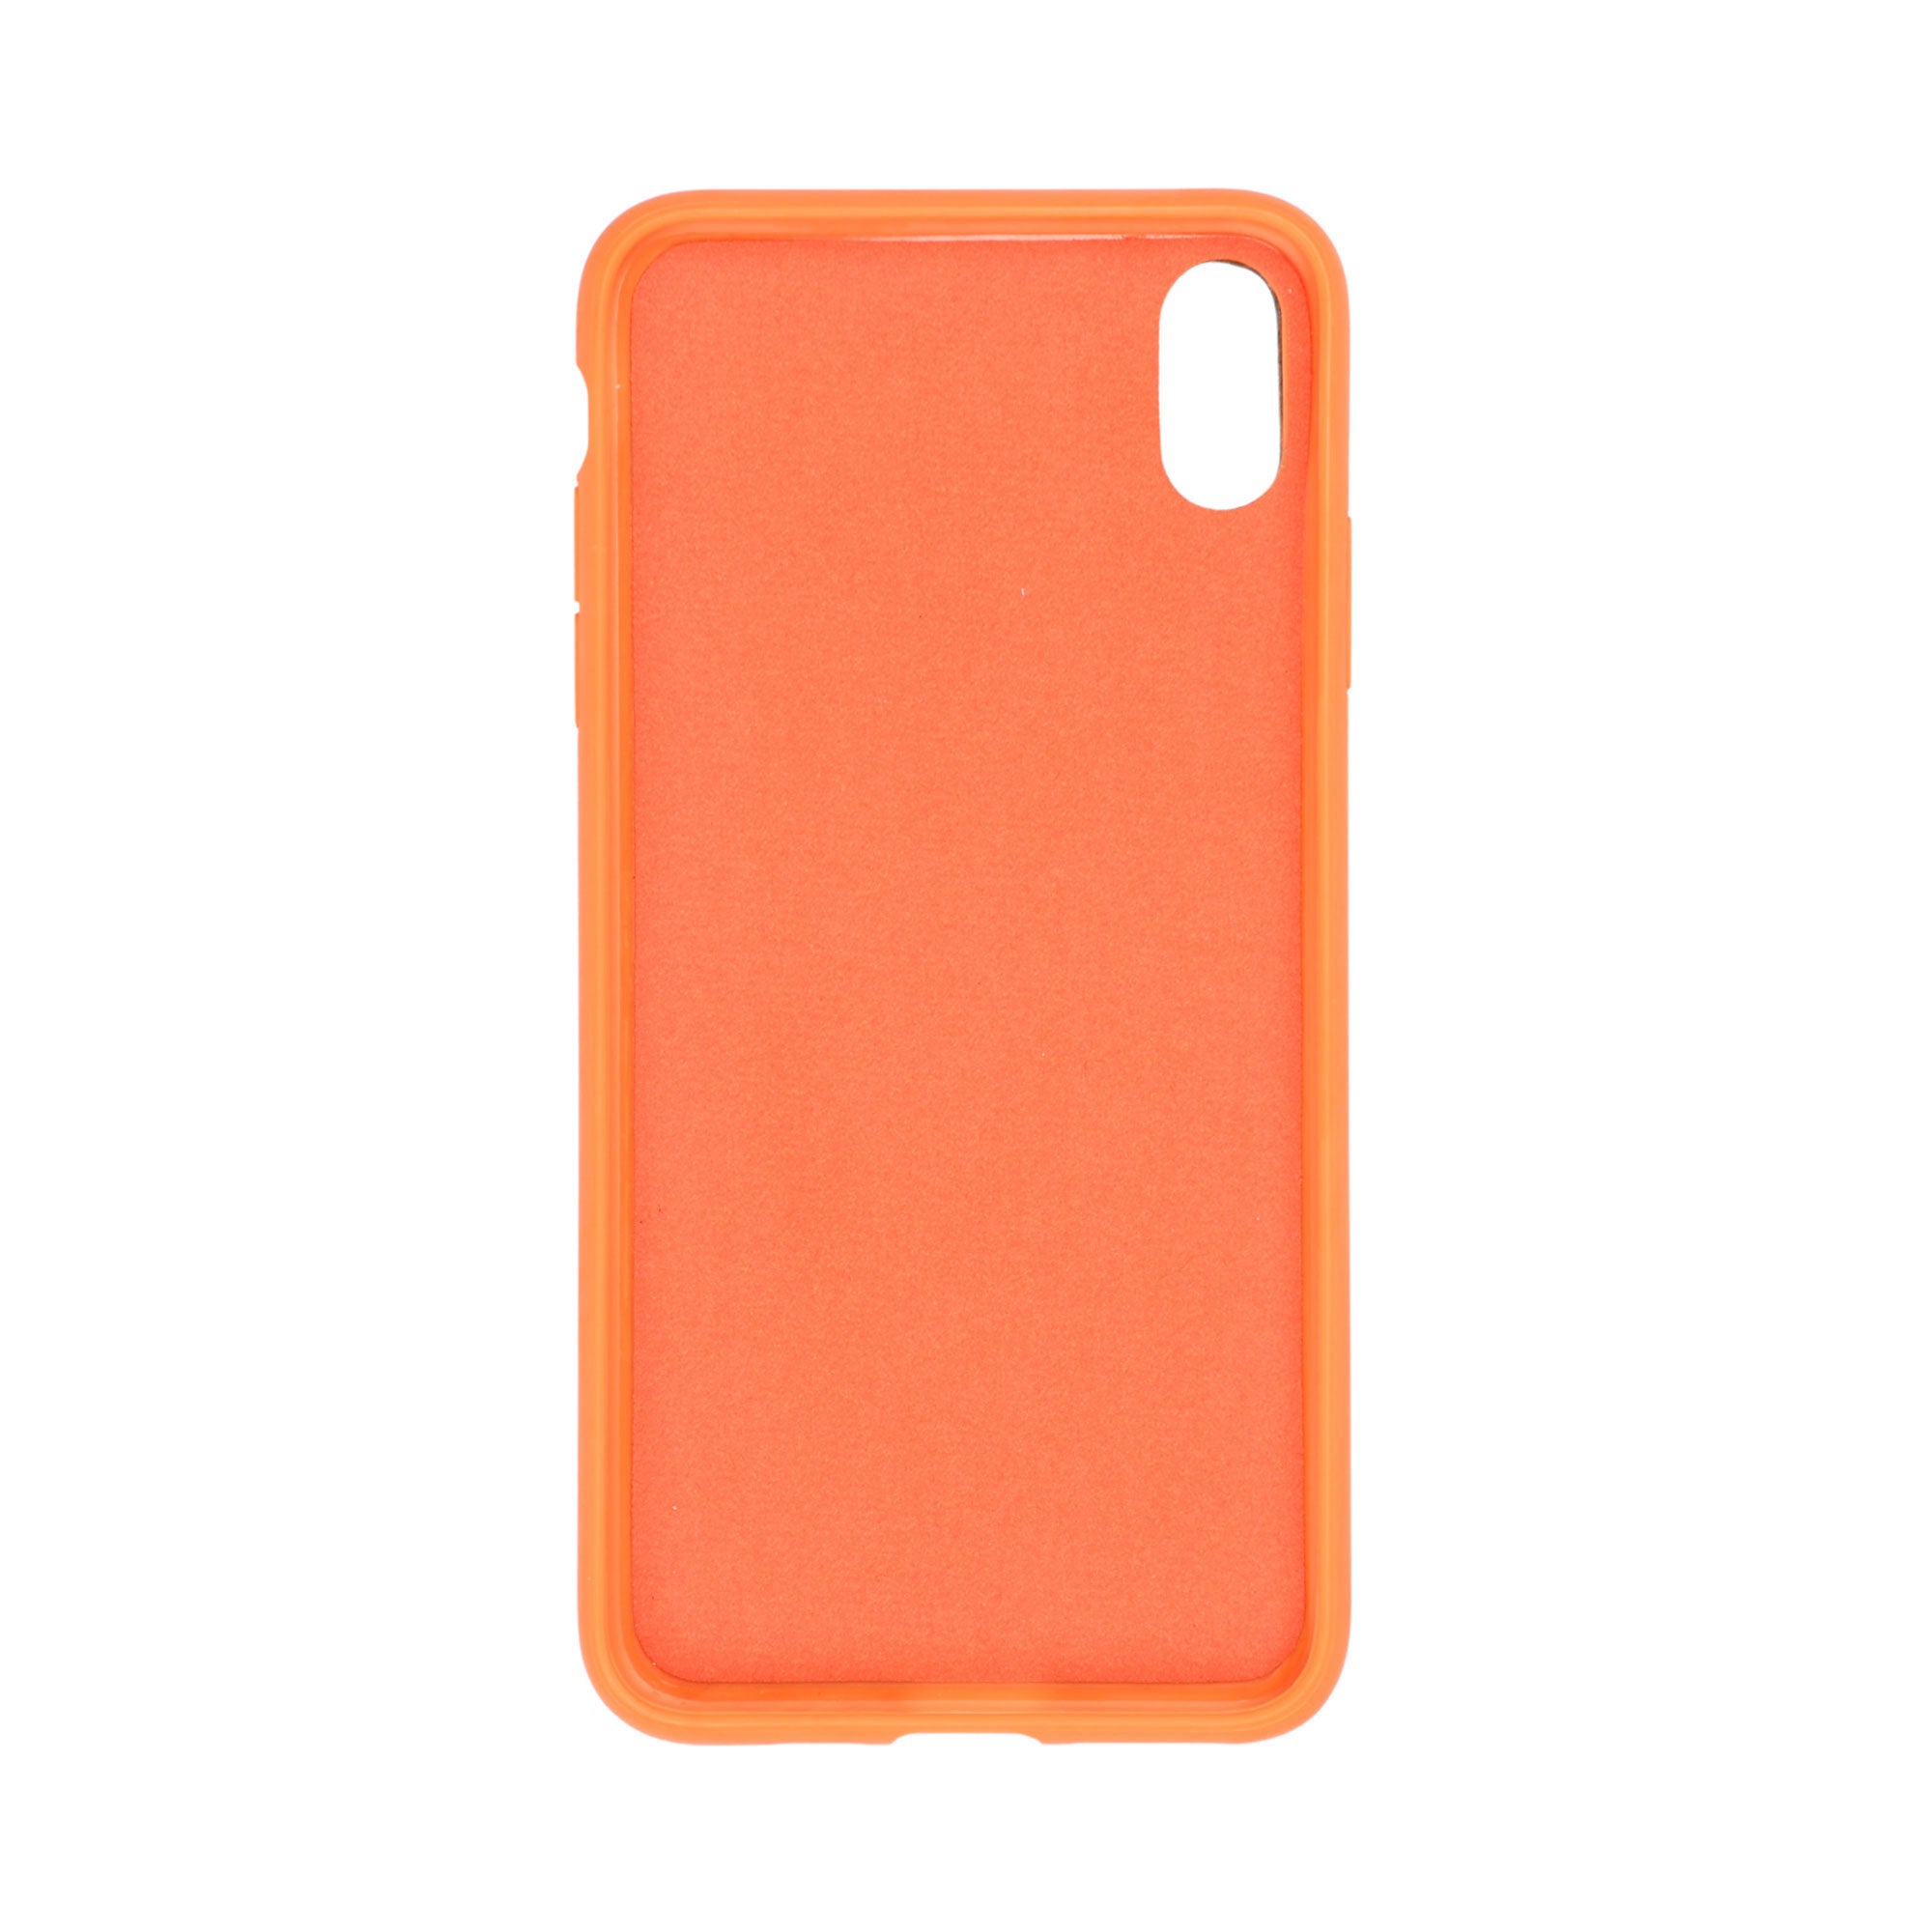 Falta Kickstand Cover For iPhone X/XR/XS Max